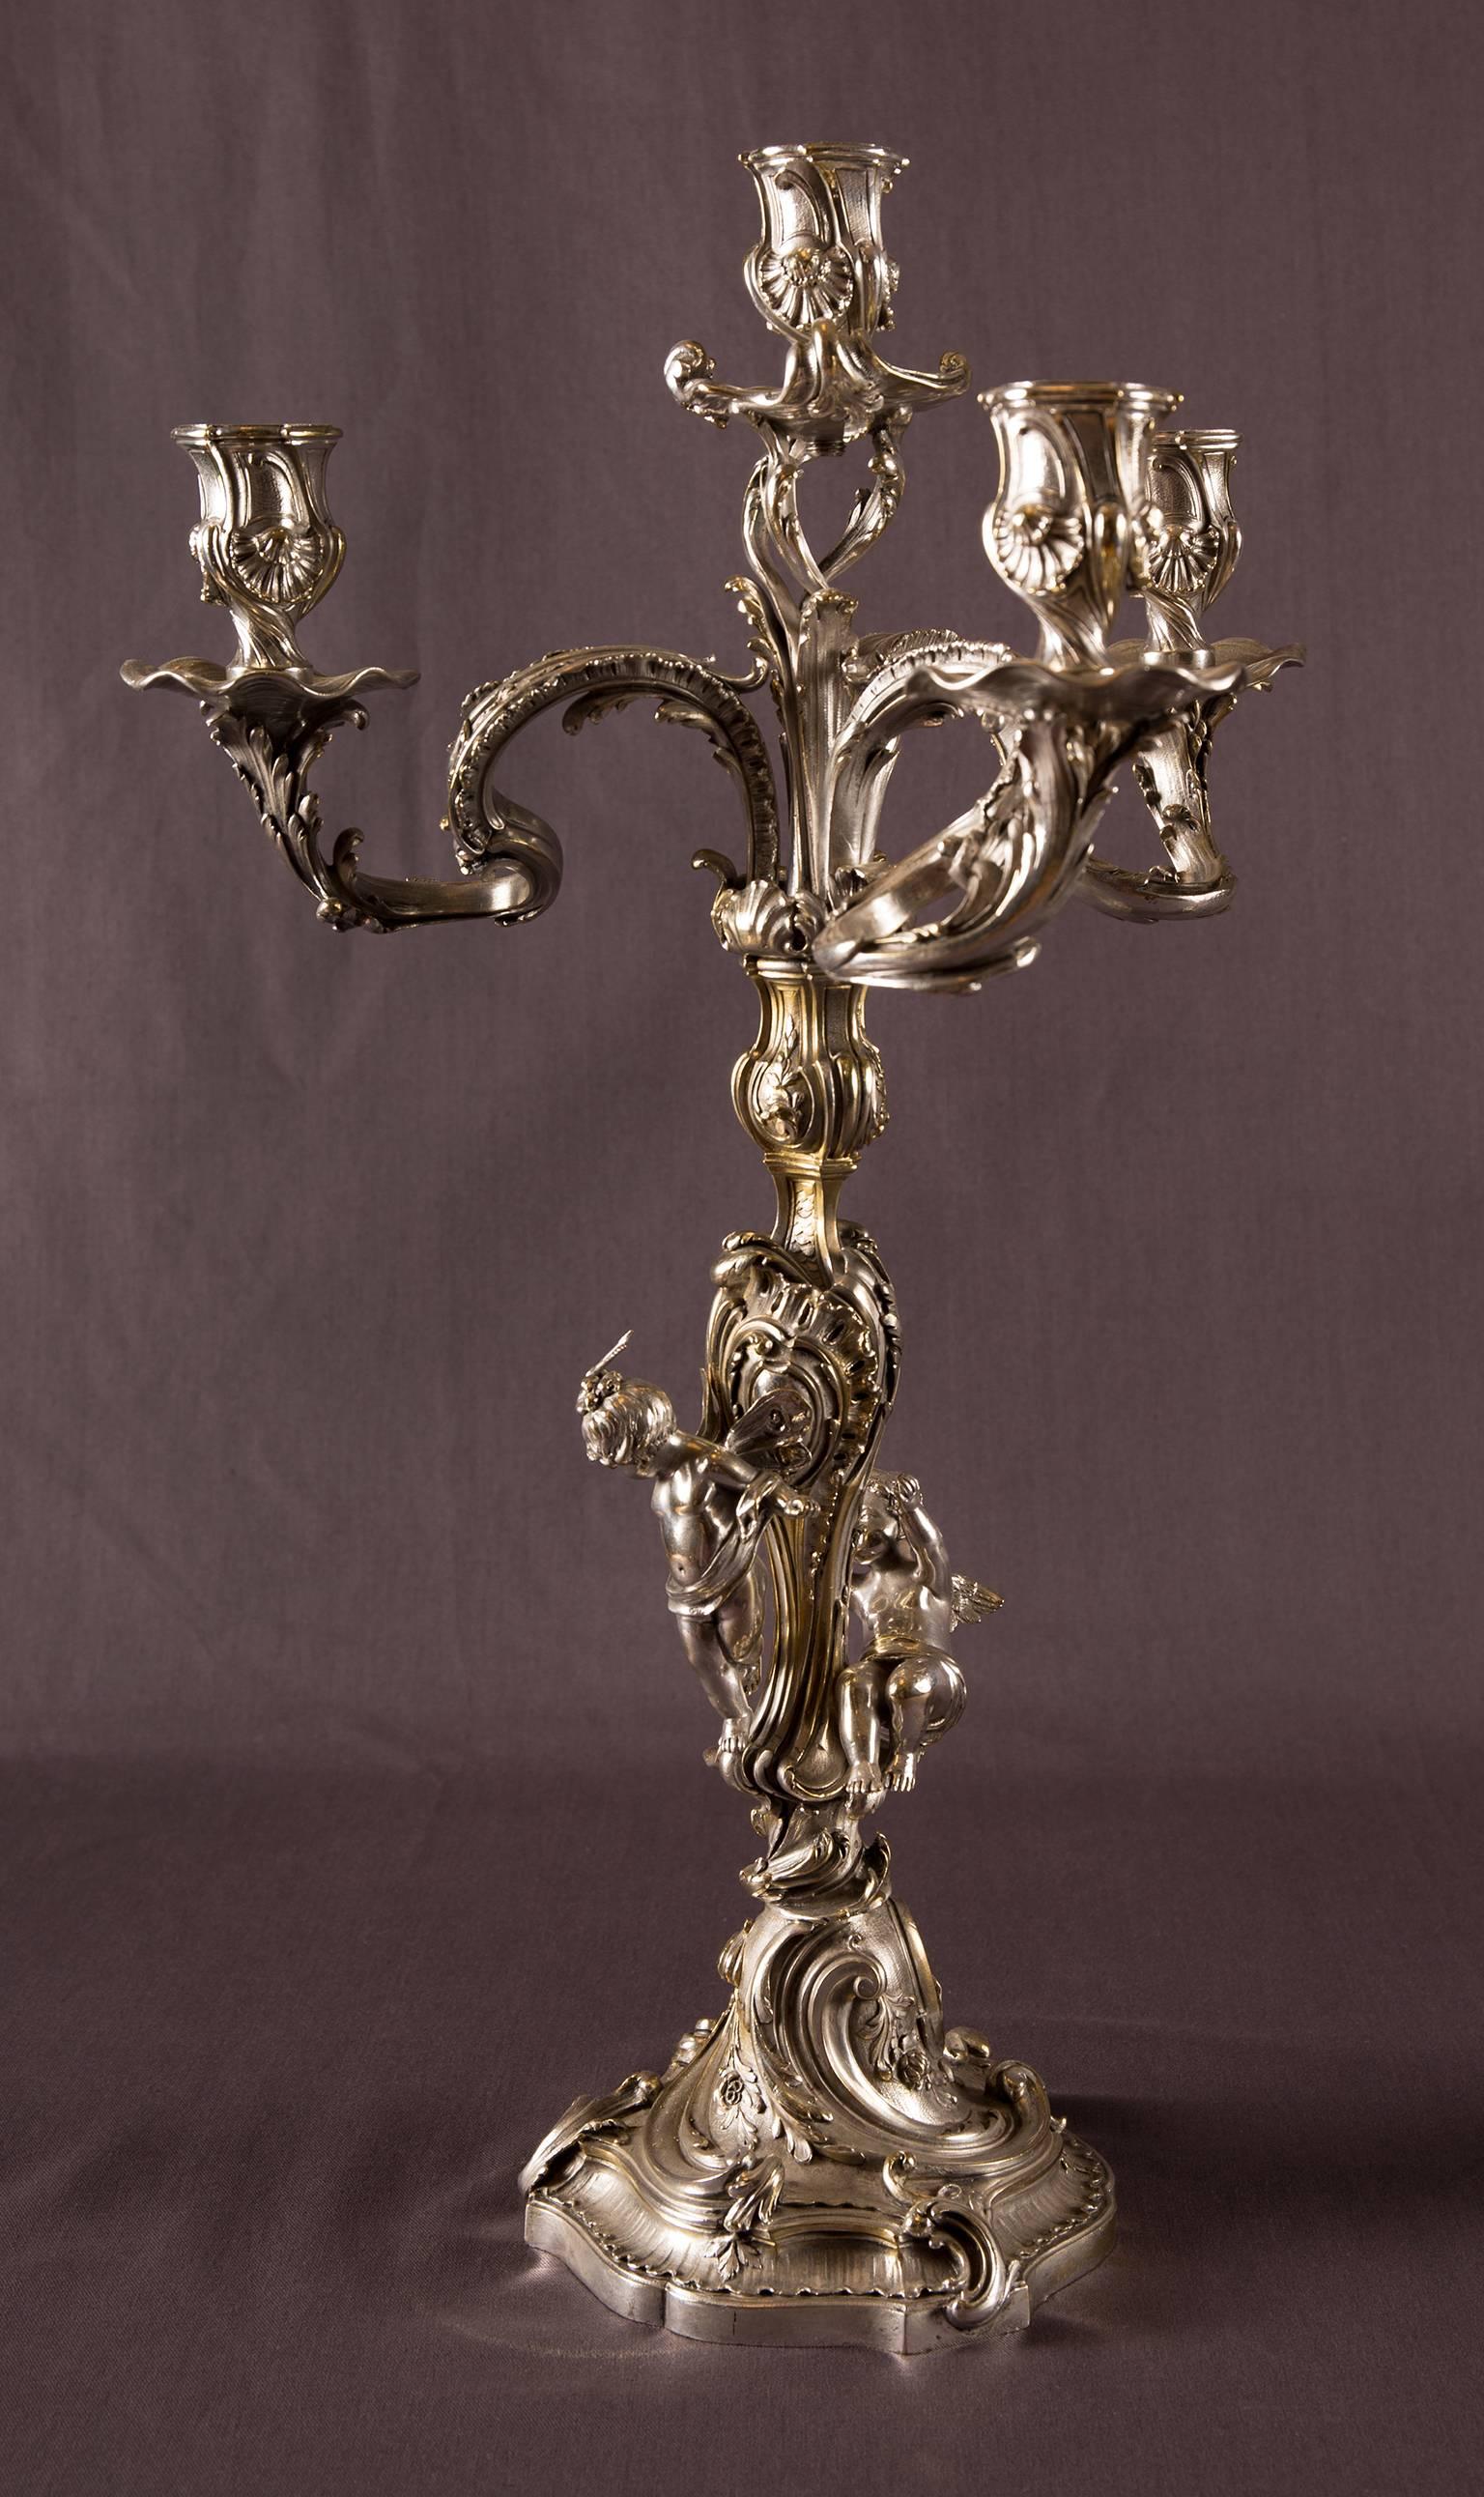 Pair of good quality and finely detailed silvered bronze five-light candelabra. Each candleholder has two putti on its stem. Louis XV style, France, circa 1890-1900.
Very decorative to brighten a romantic dinner!